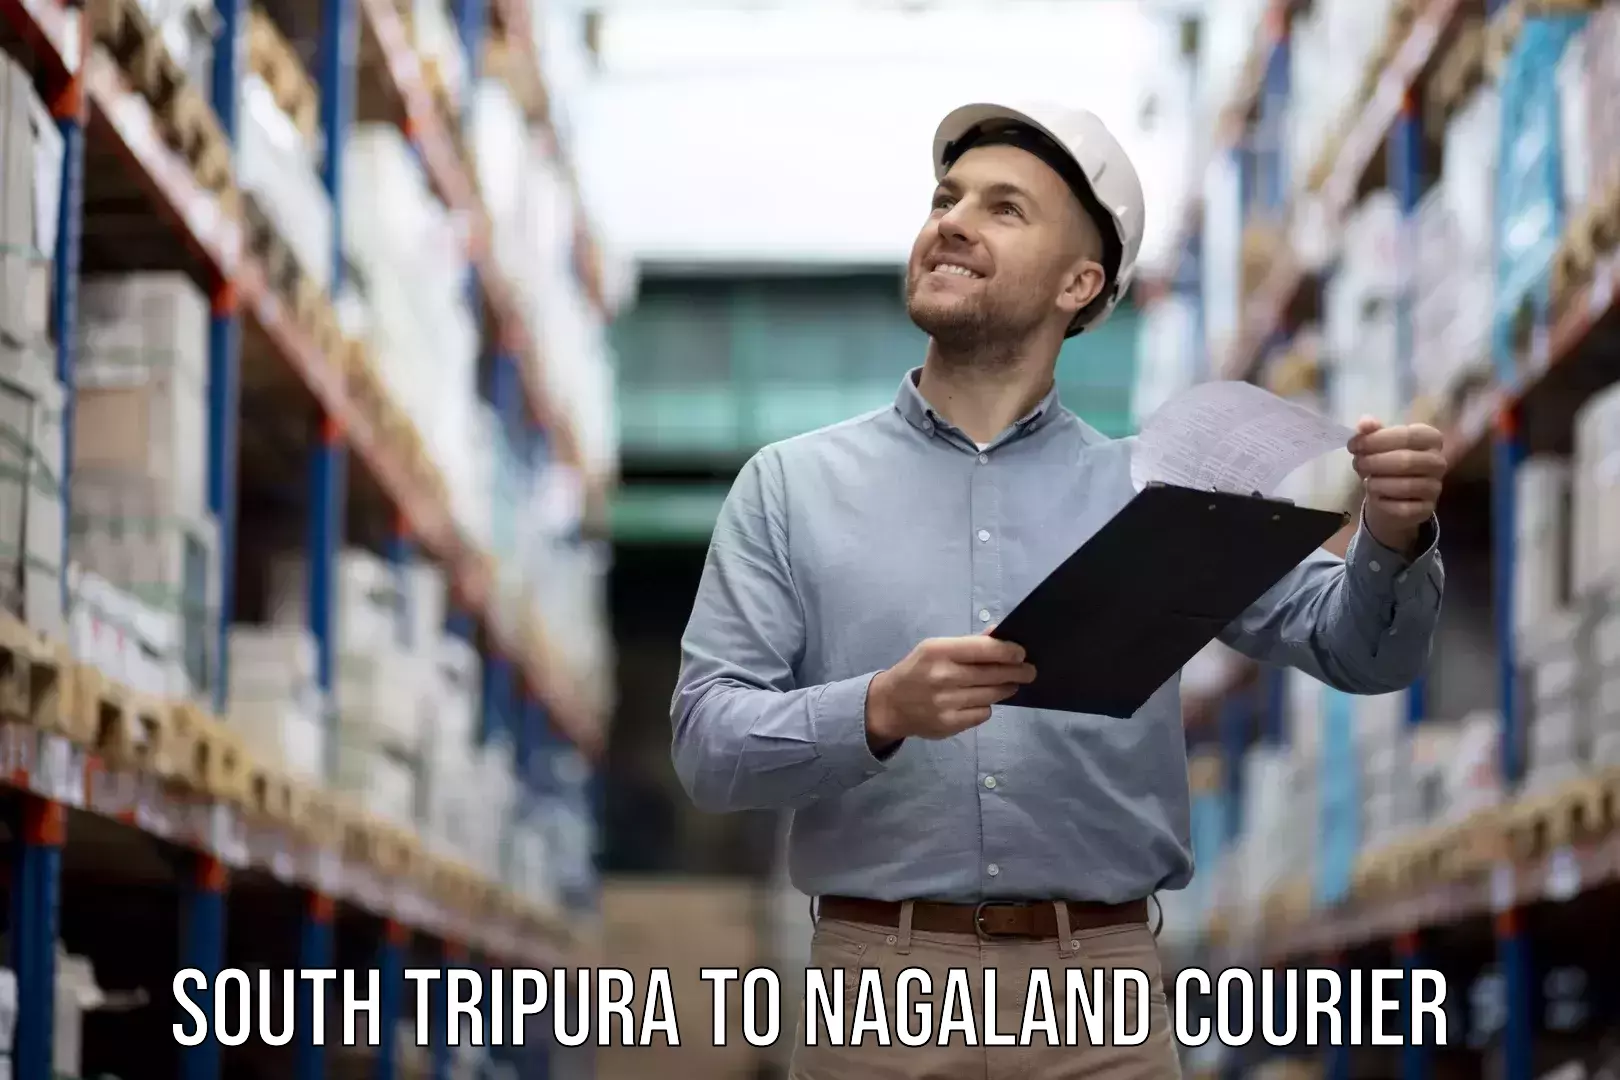 Furniture shipping services South Tripura to Nagaland